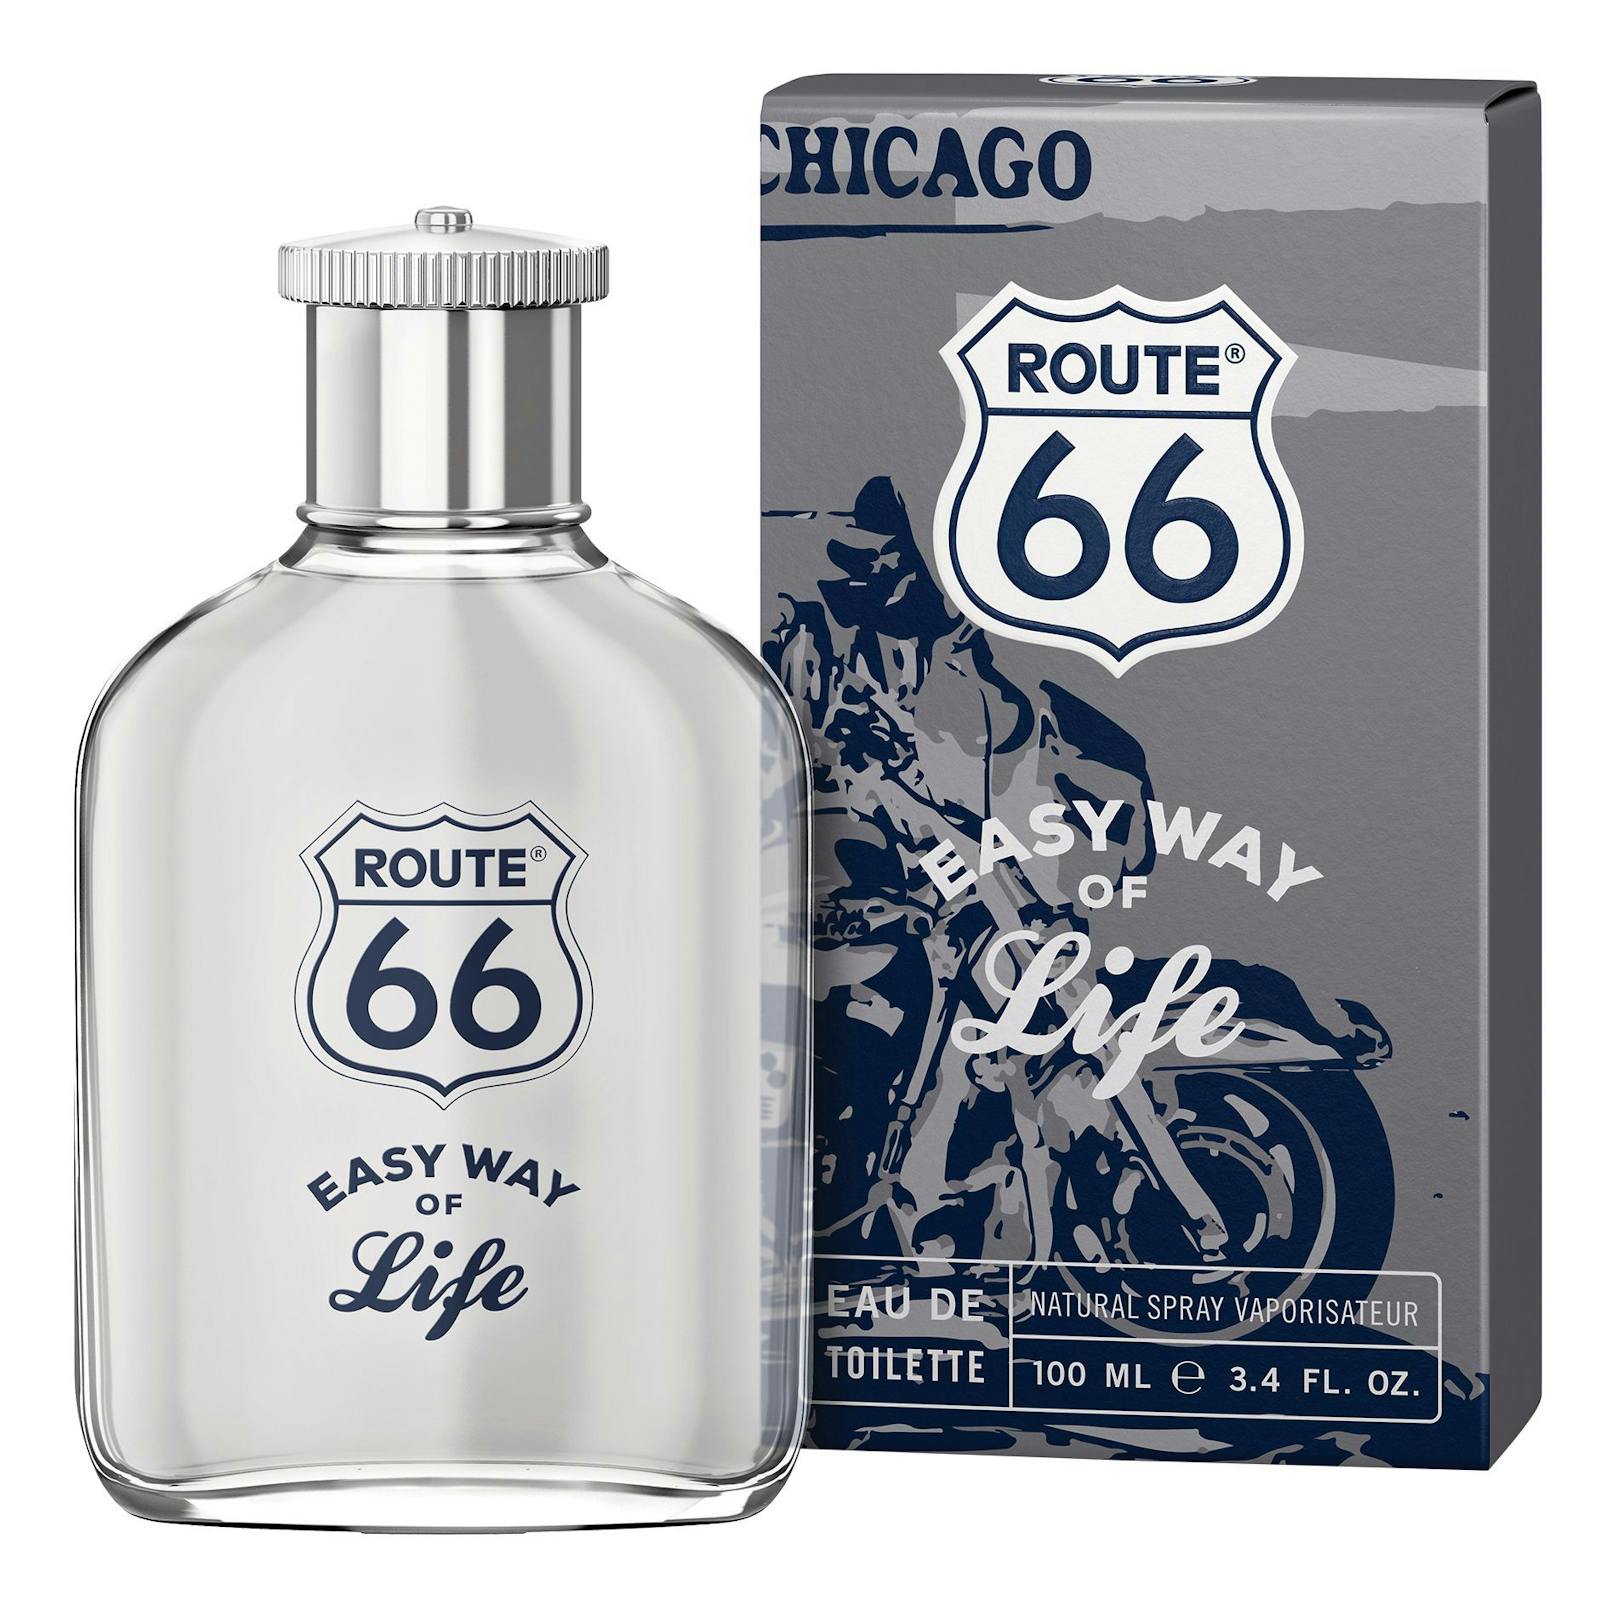 Duft "Easy Way Of Life" von Route 66